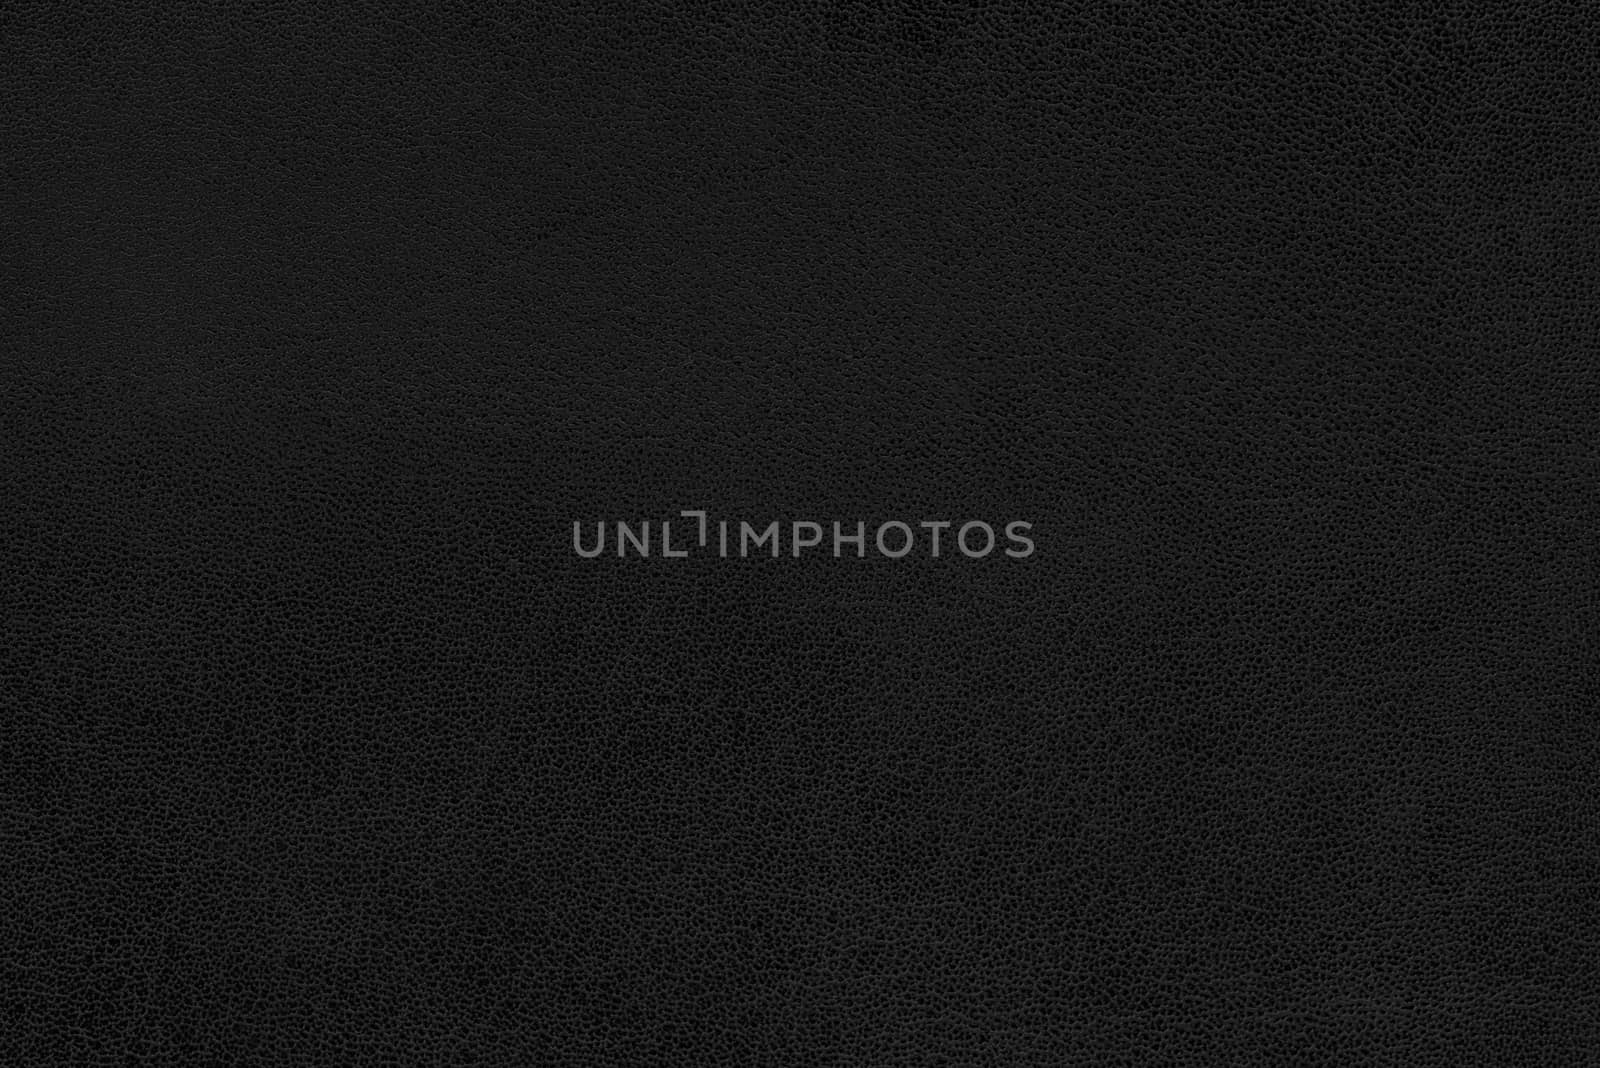 Black colored leather texture as abstract background